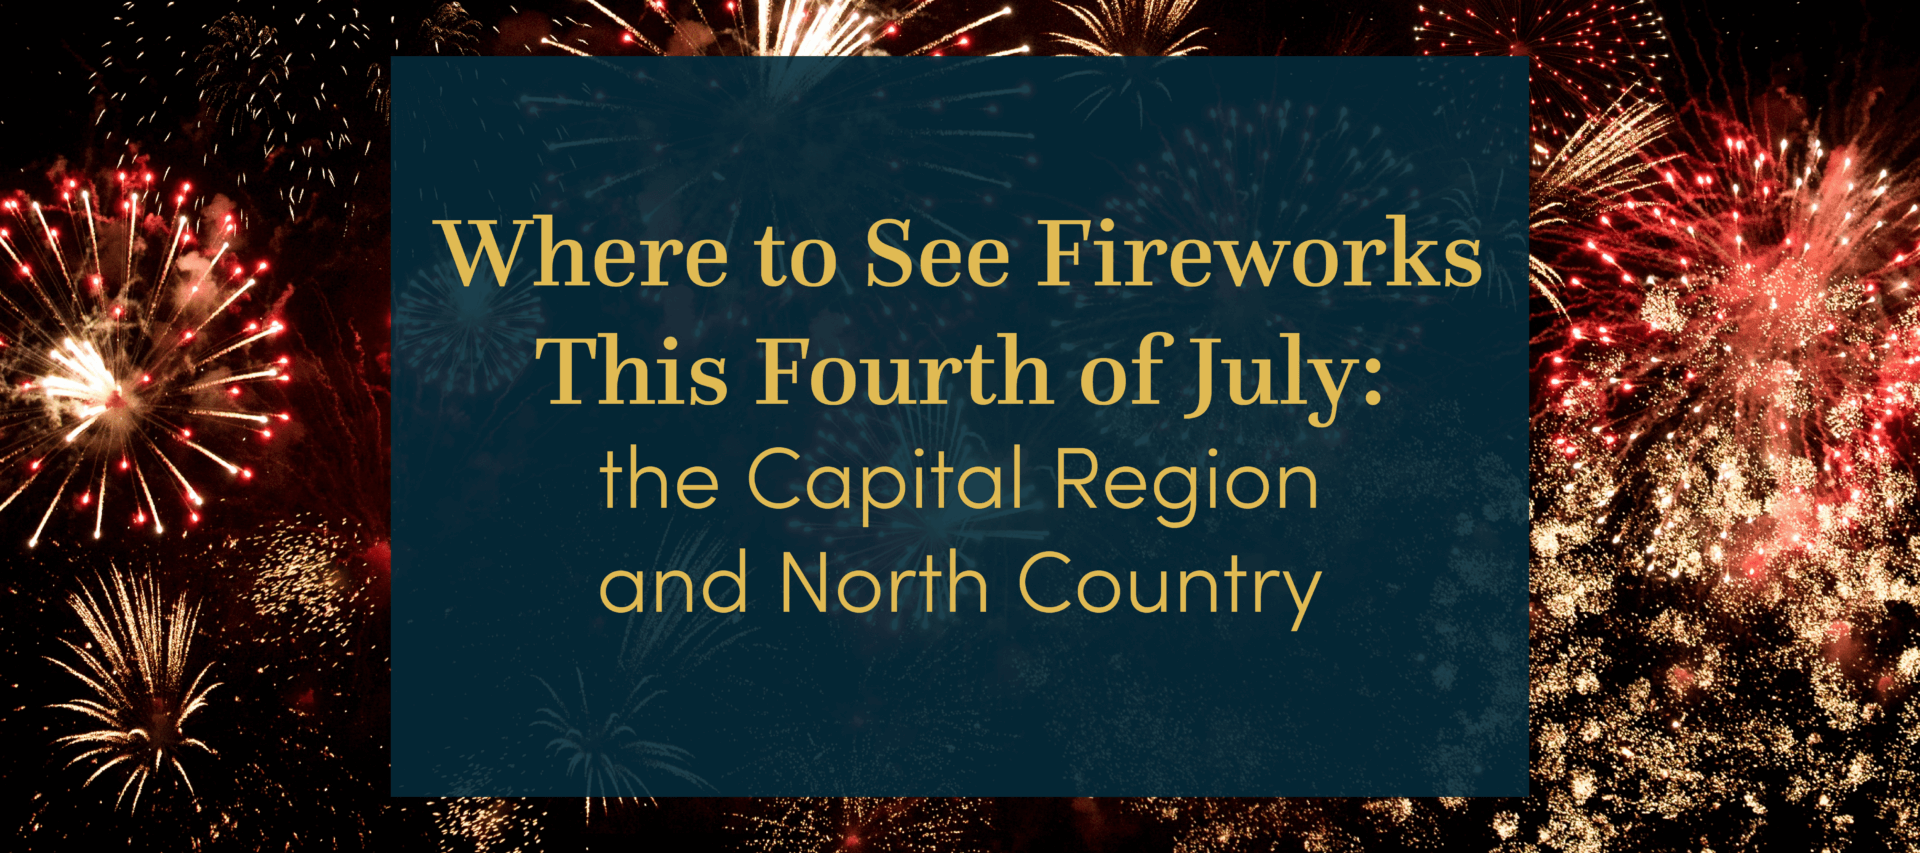 Where to See Fireworks This Fourth of July: the Capital Region and North Country